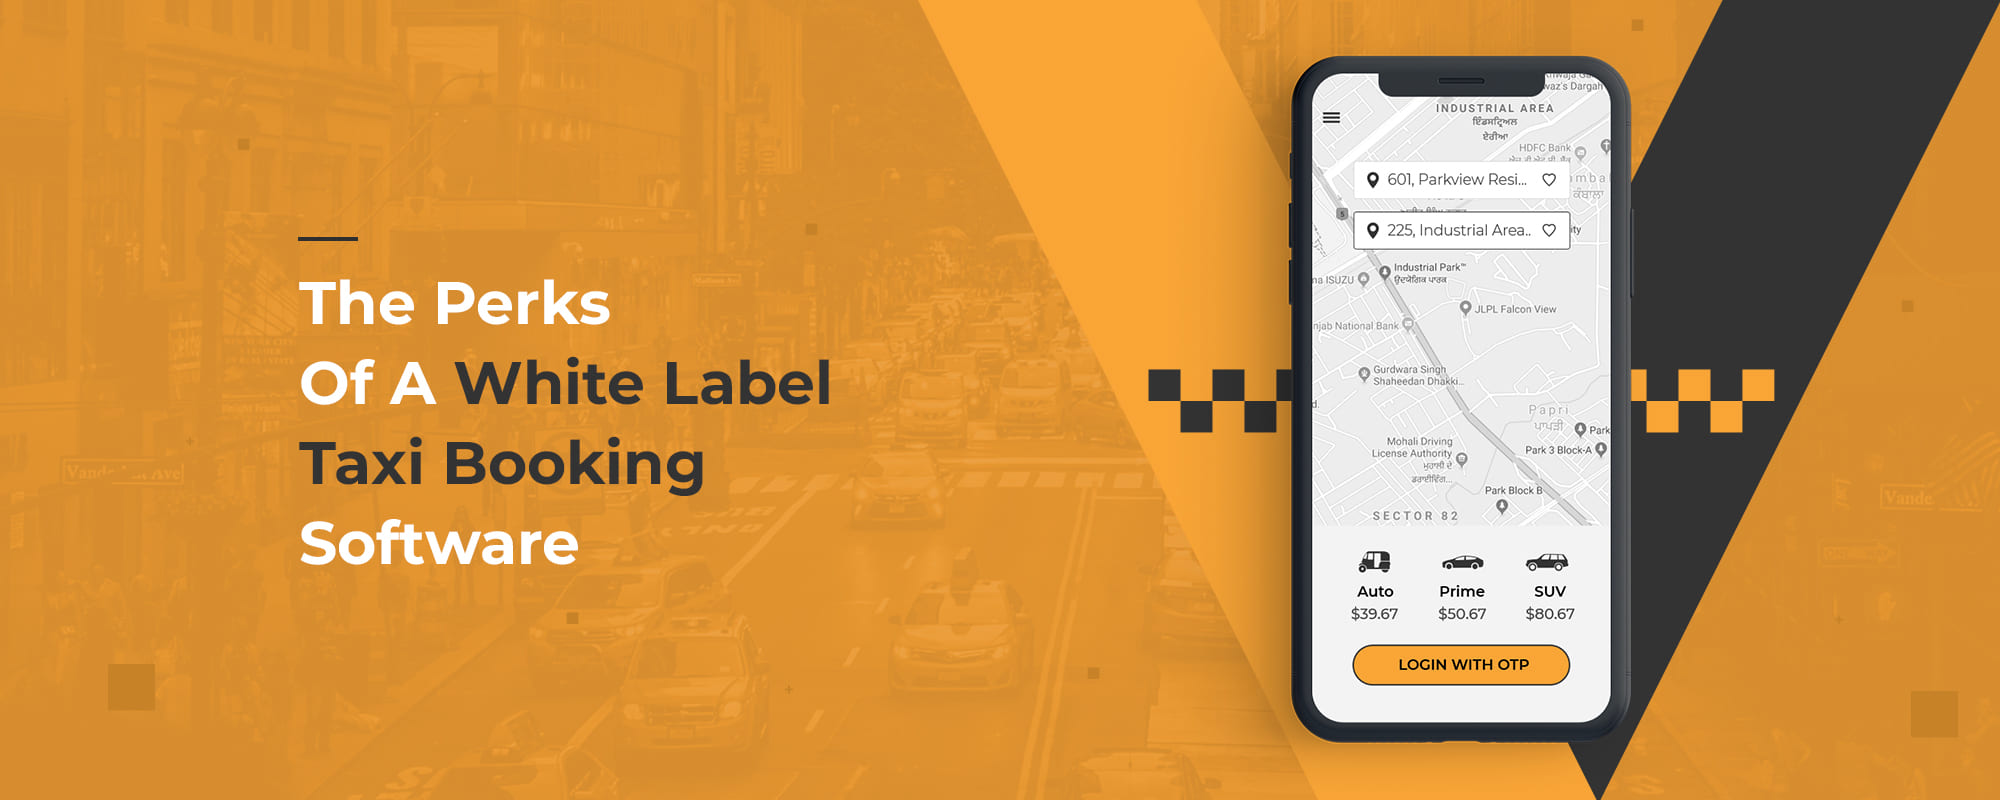 Why Launch a Taxi Booking Mobile App With White Label Taxi Booking Software?